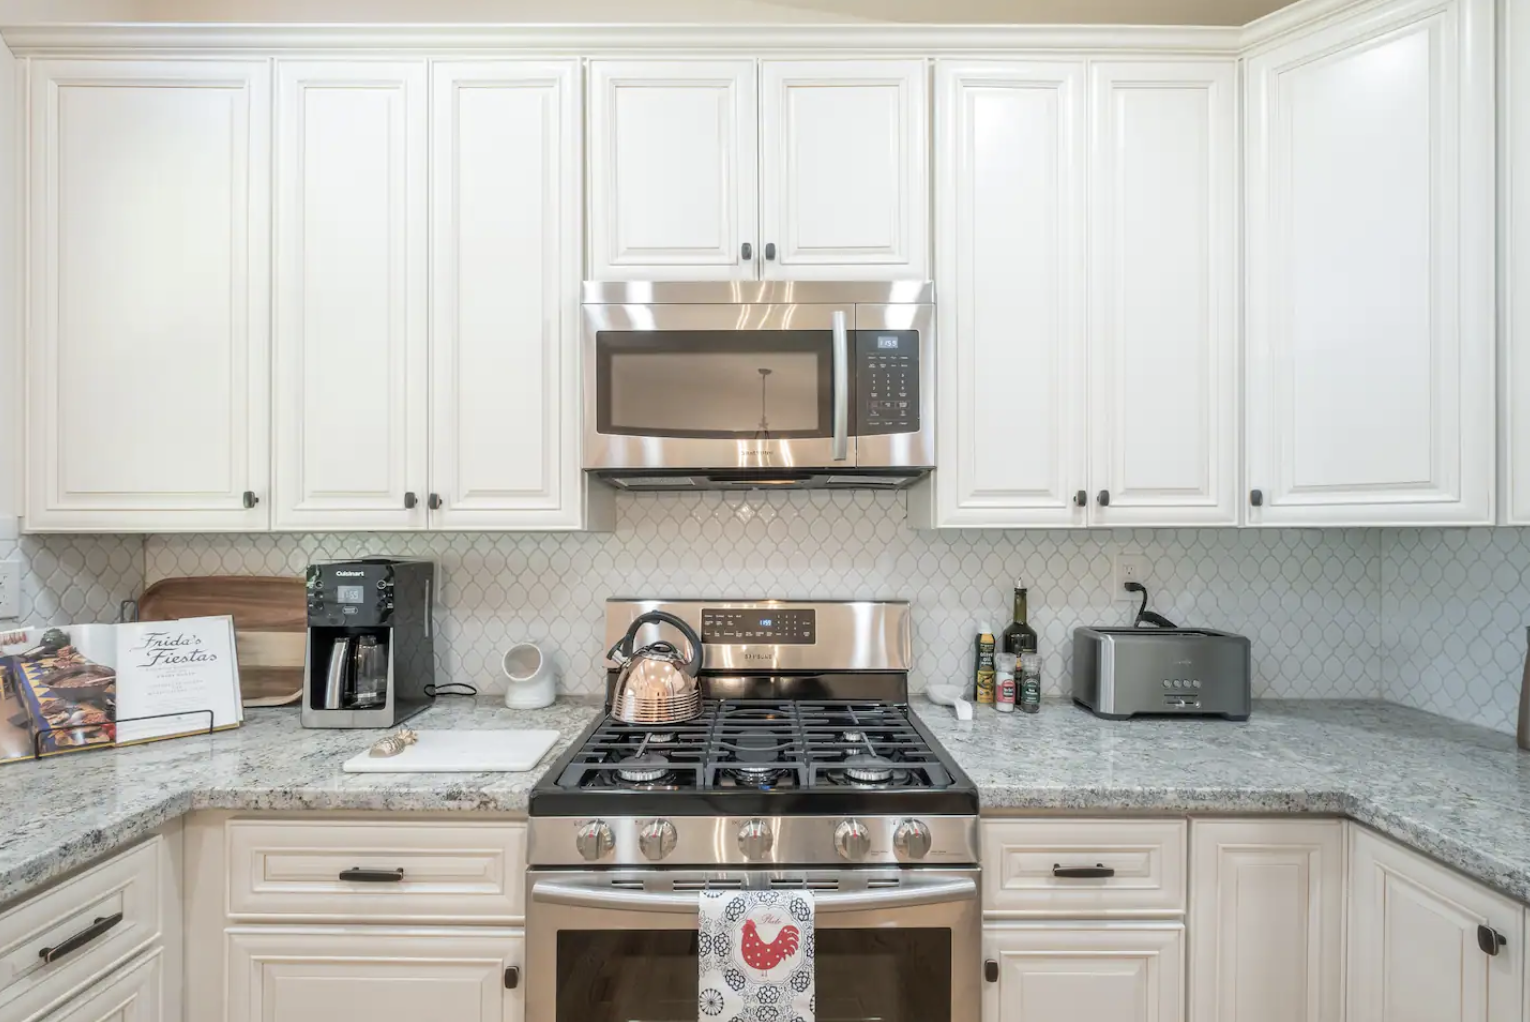 Enjoy a fully equipped kitchen so you can stay a while.